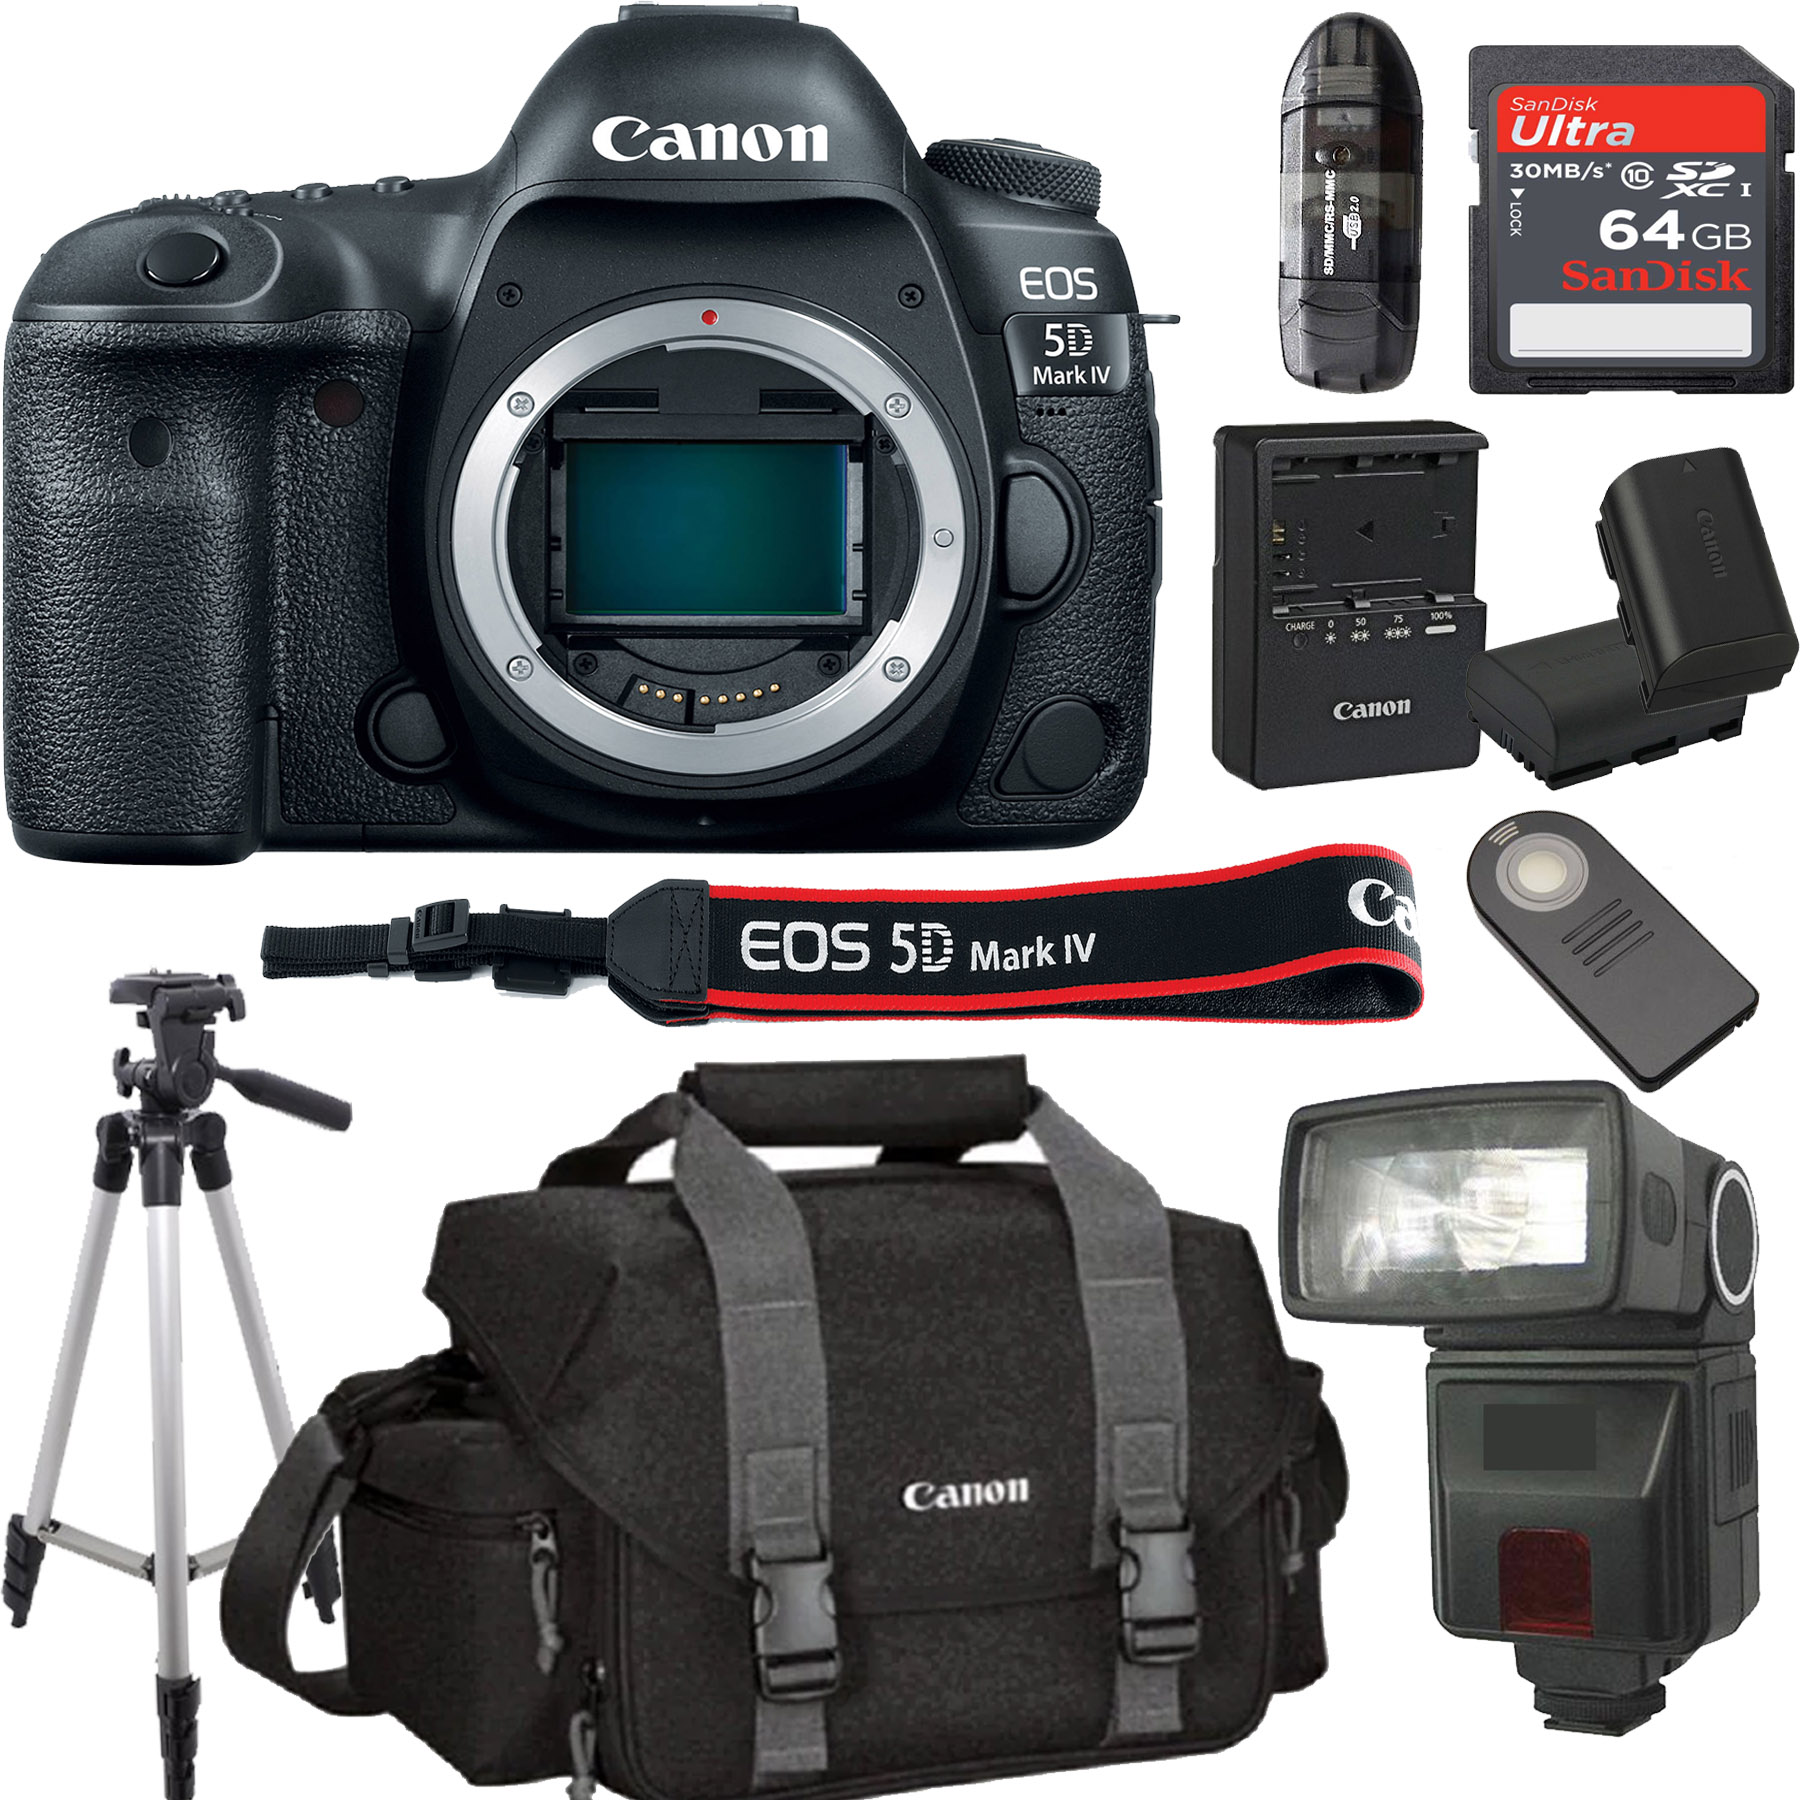 Canon EOS 5D Mark IV Full Frame Digital SLR Camera Body Only (No Lens) Bundle + 64GB High Speed Memory Card + Canon 300DG Deluxe Camera Bag + Wireless Remote Shutter + Tripod + More - image 2 of 2